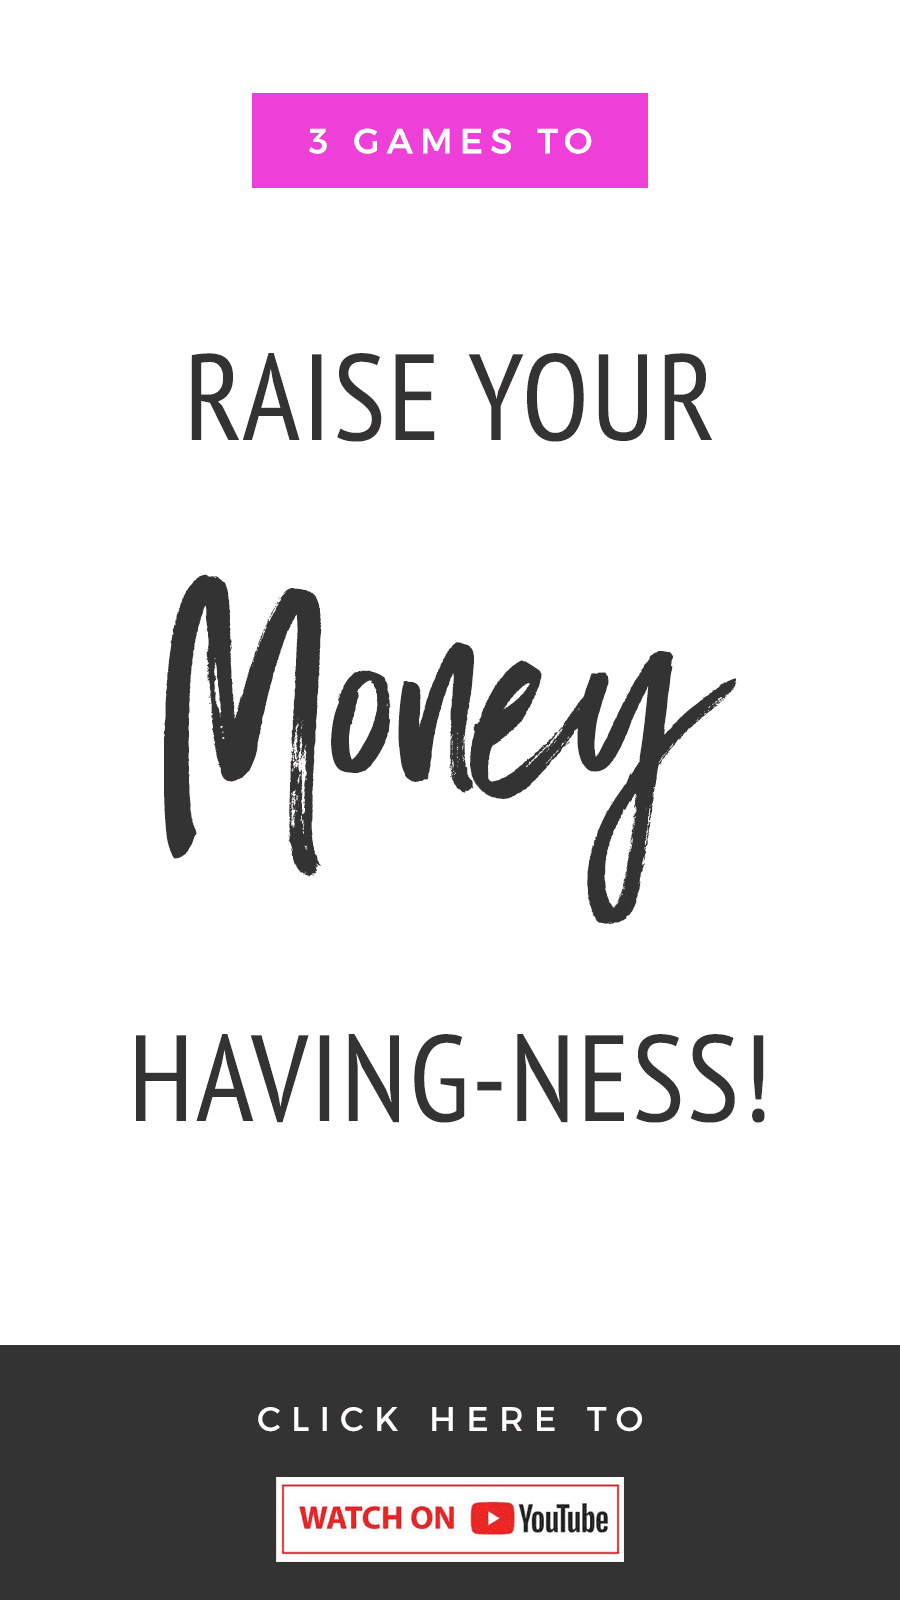 3 Games To Raise Your Money Having-ness Levels!